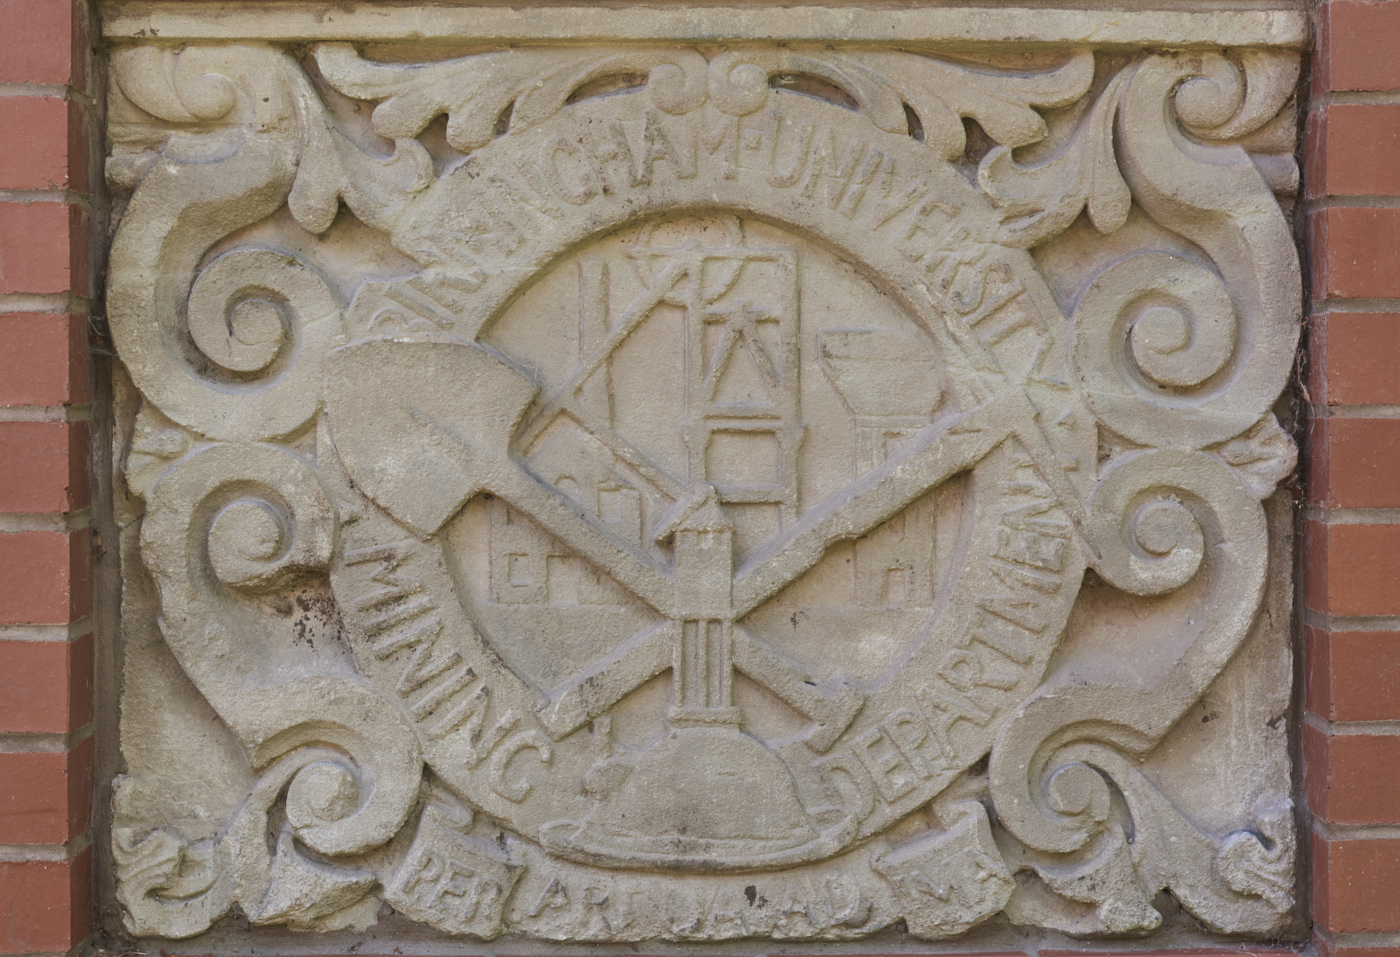 Carved stone heraldic shield from the Mining Department